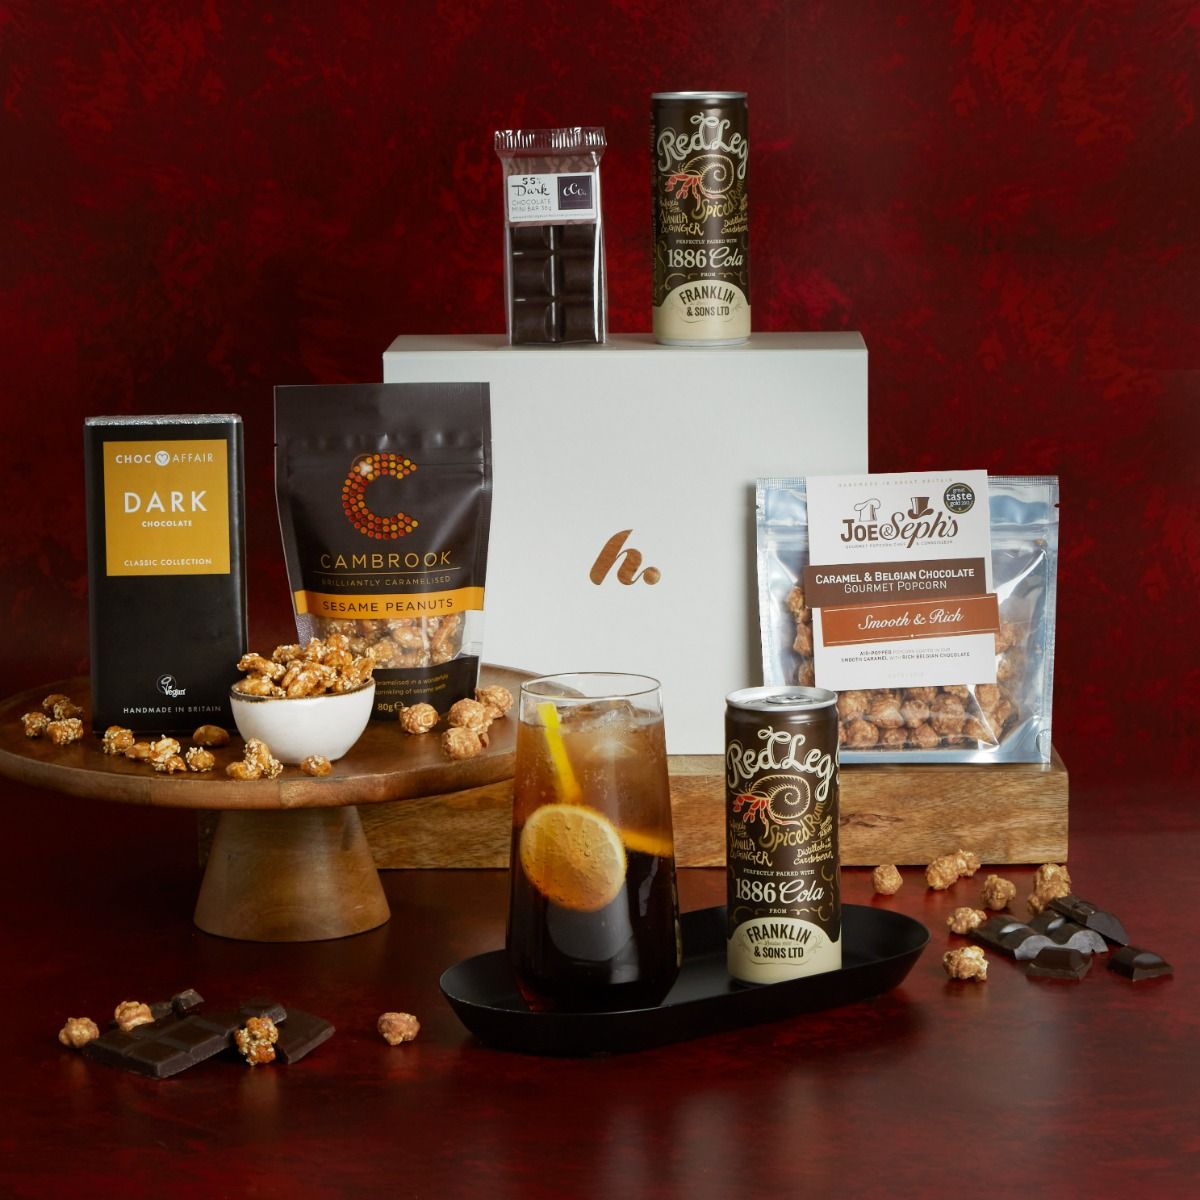 Rum and Treats hamper with contents on display